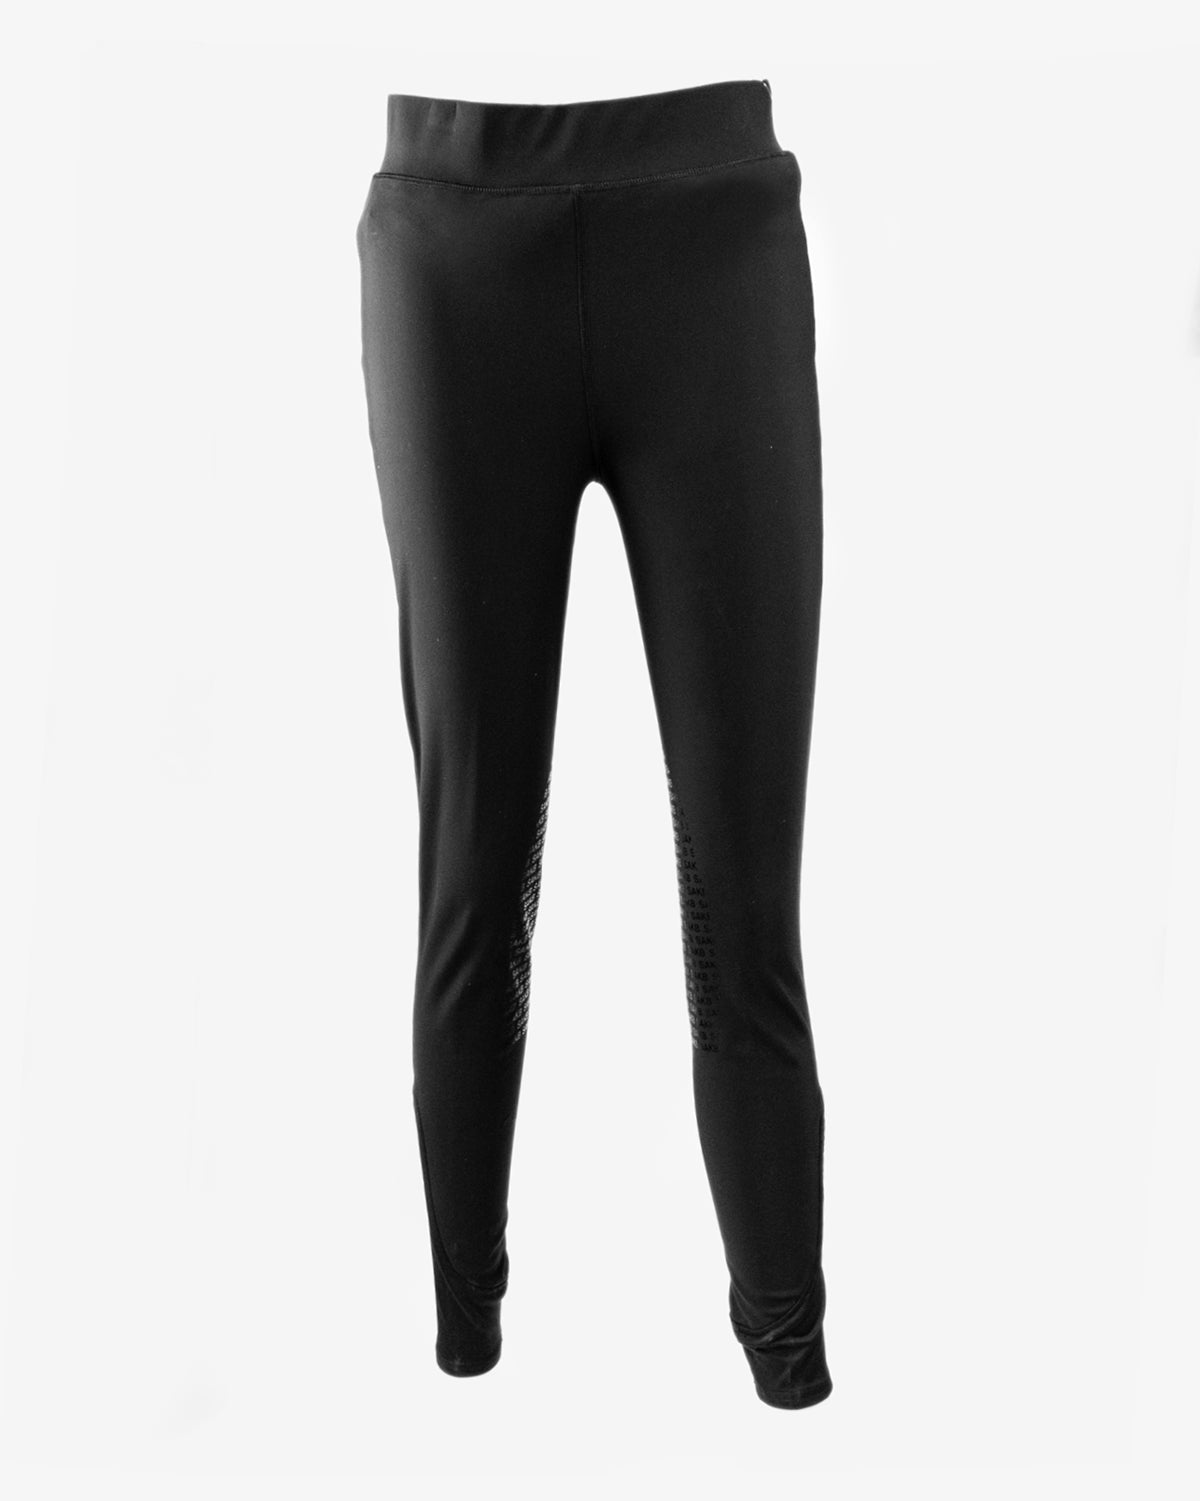 Kids Technical Tights